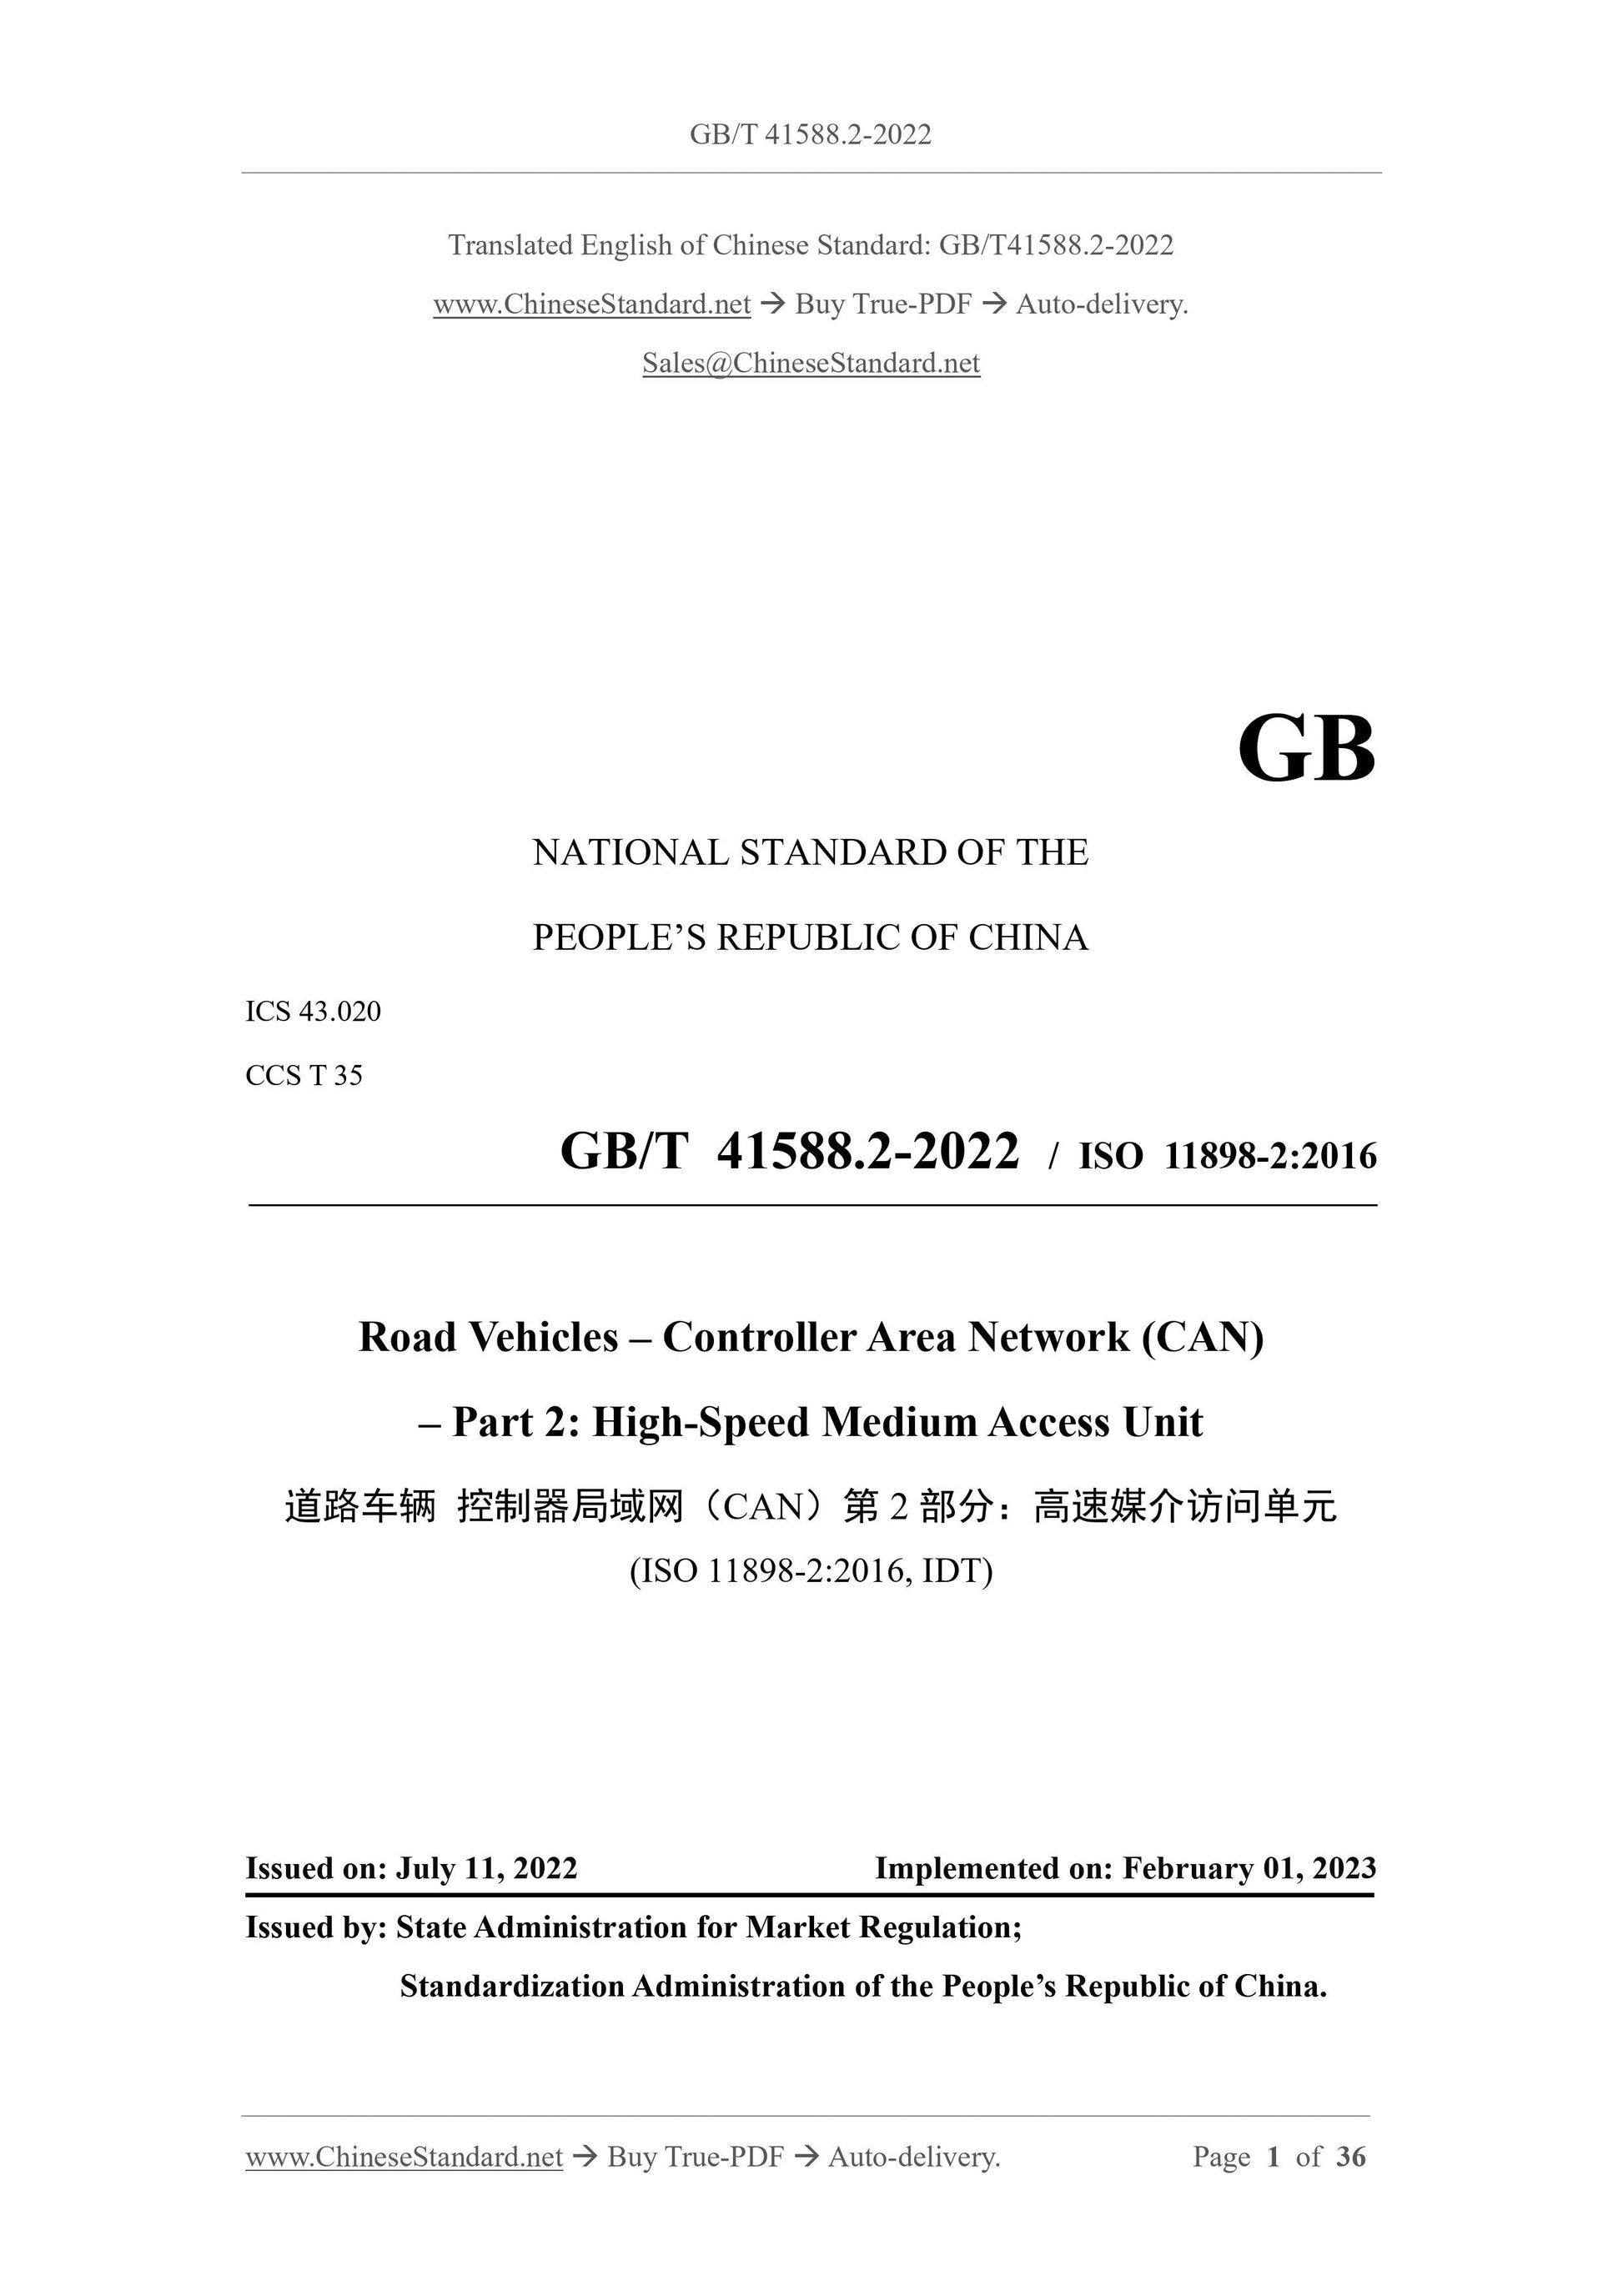 GB/T 41588.2-2022 Page 1